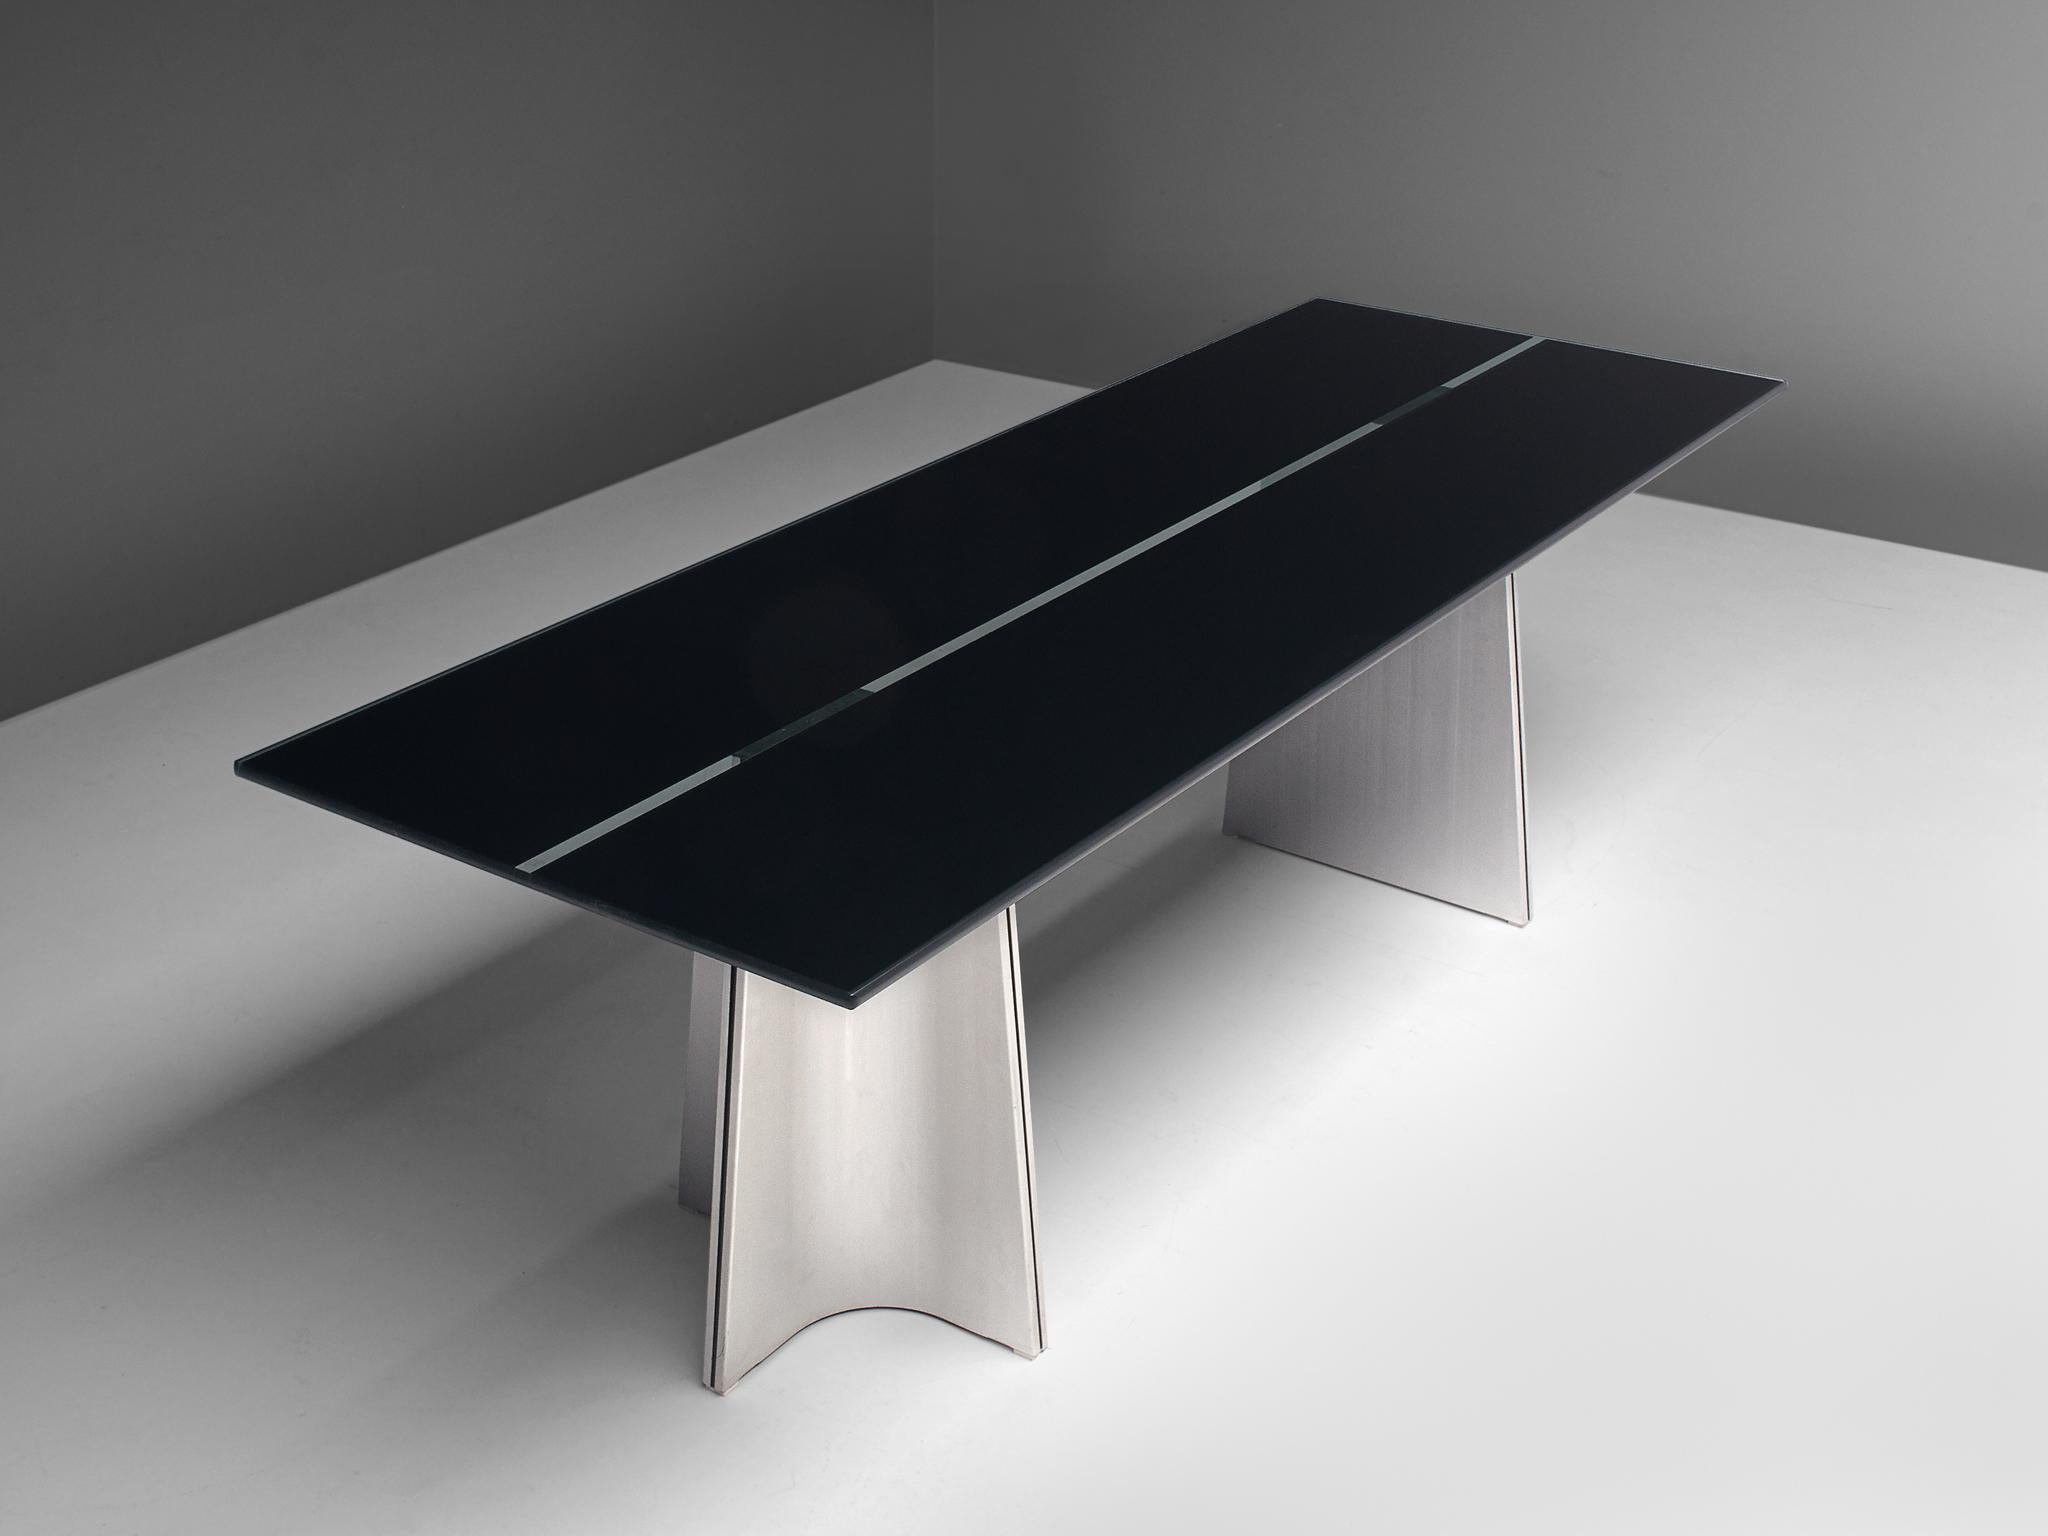 Luigi Saccardo, dining table model 'Ufo', metal and glass, Italy, 1970s

Sculptural Postmodern dining table or desk, named Ufo, by Luigi Saccardo
The base consists of two legs which are formed of two concave curved plates of metal and one